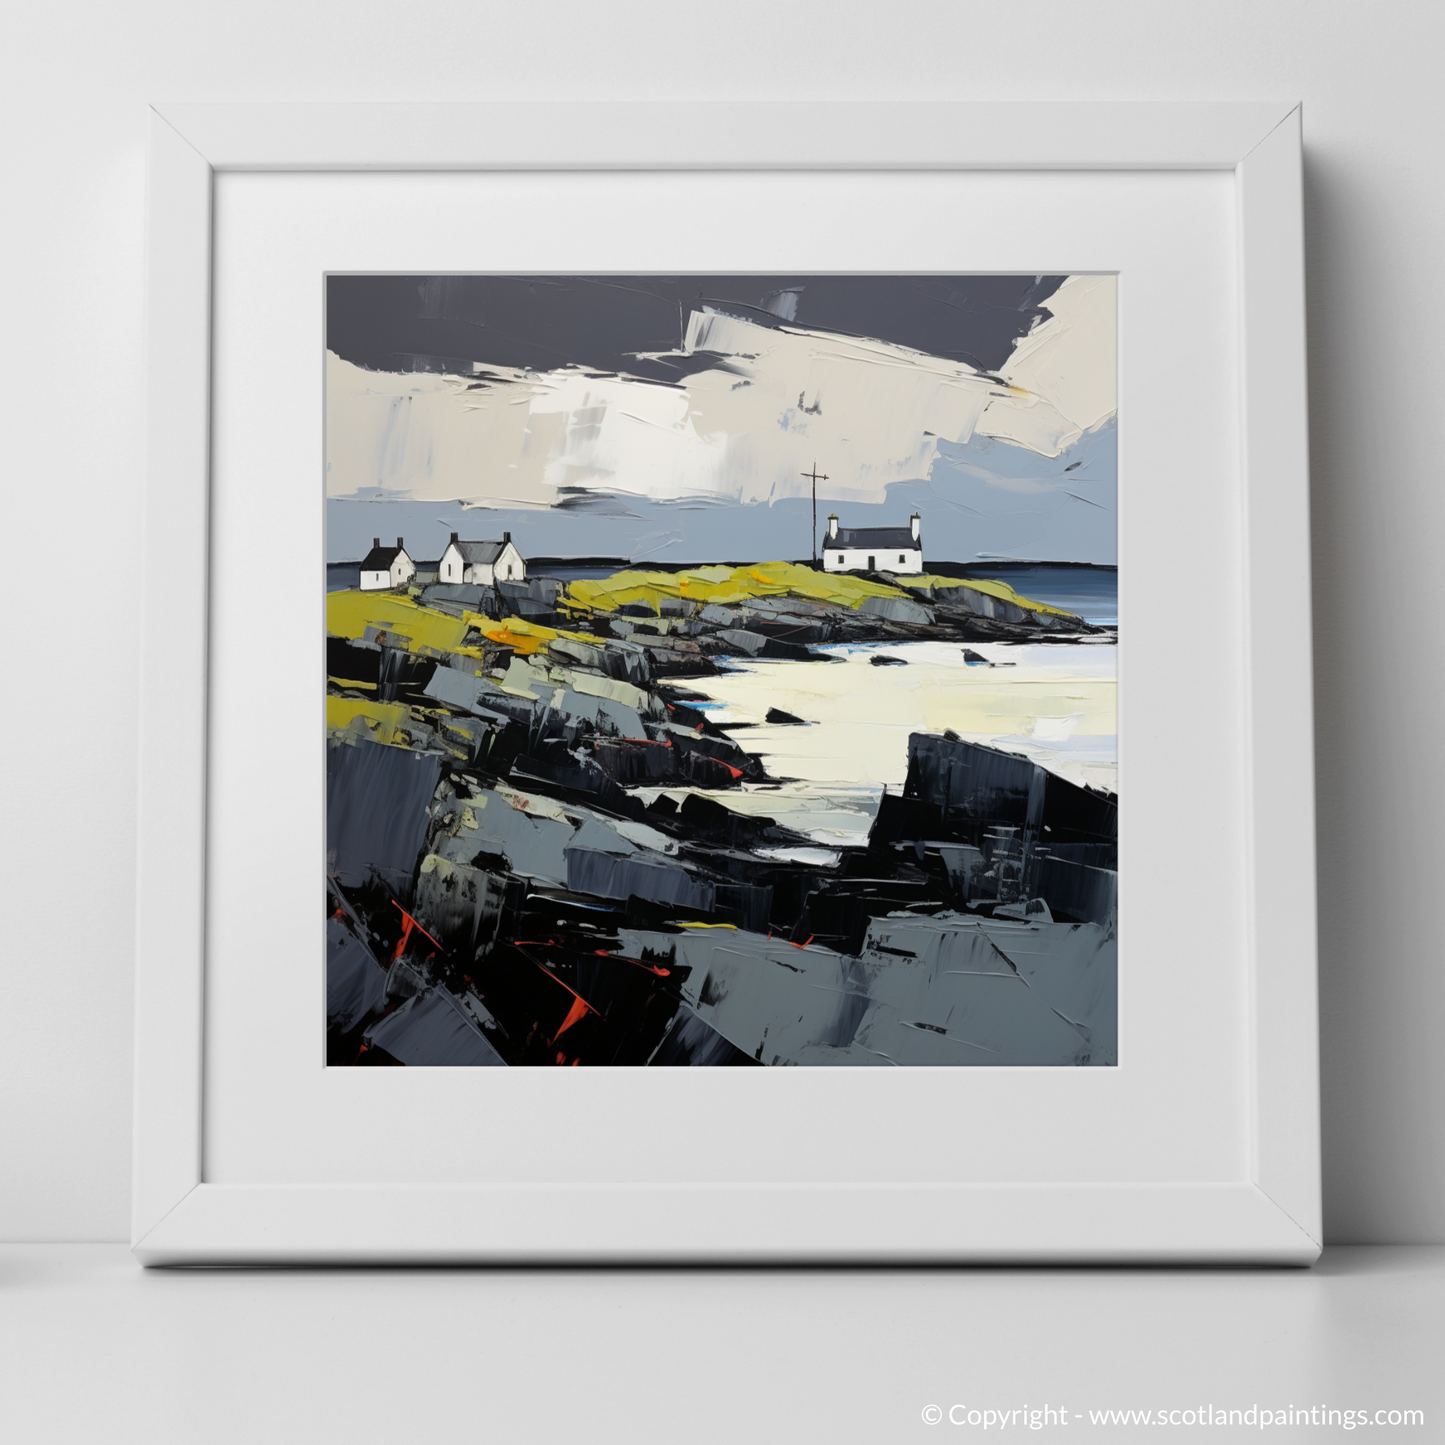 Painting and Art Print of Isle of Barra, Outer Hebrides. Isle of Barra: An Expressionist Ode to the Hebridean Wild.